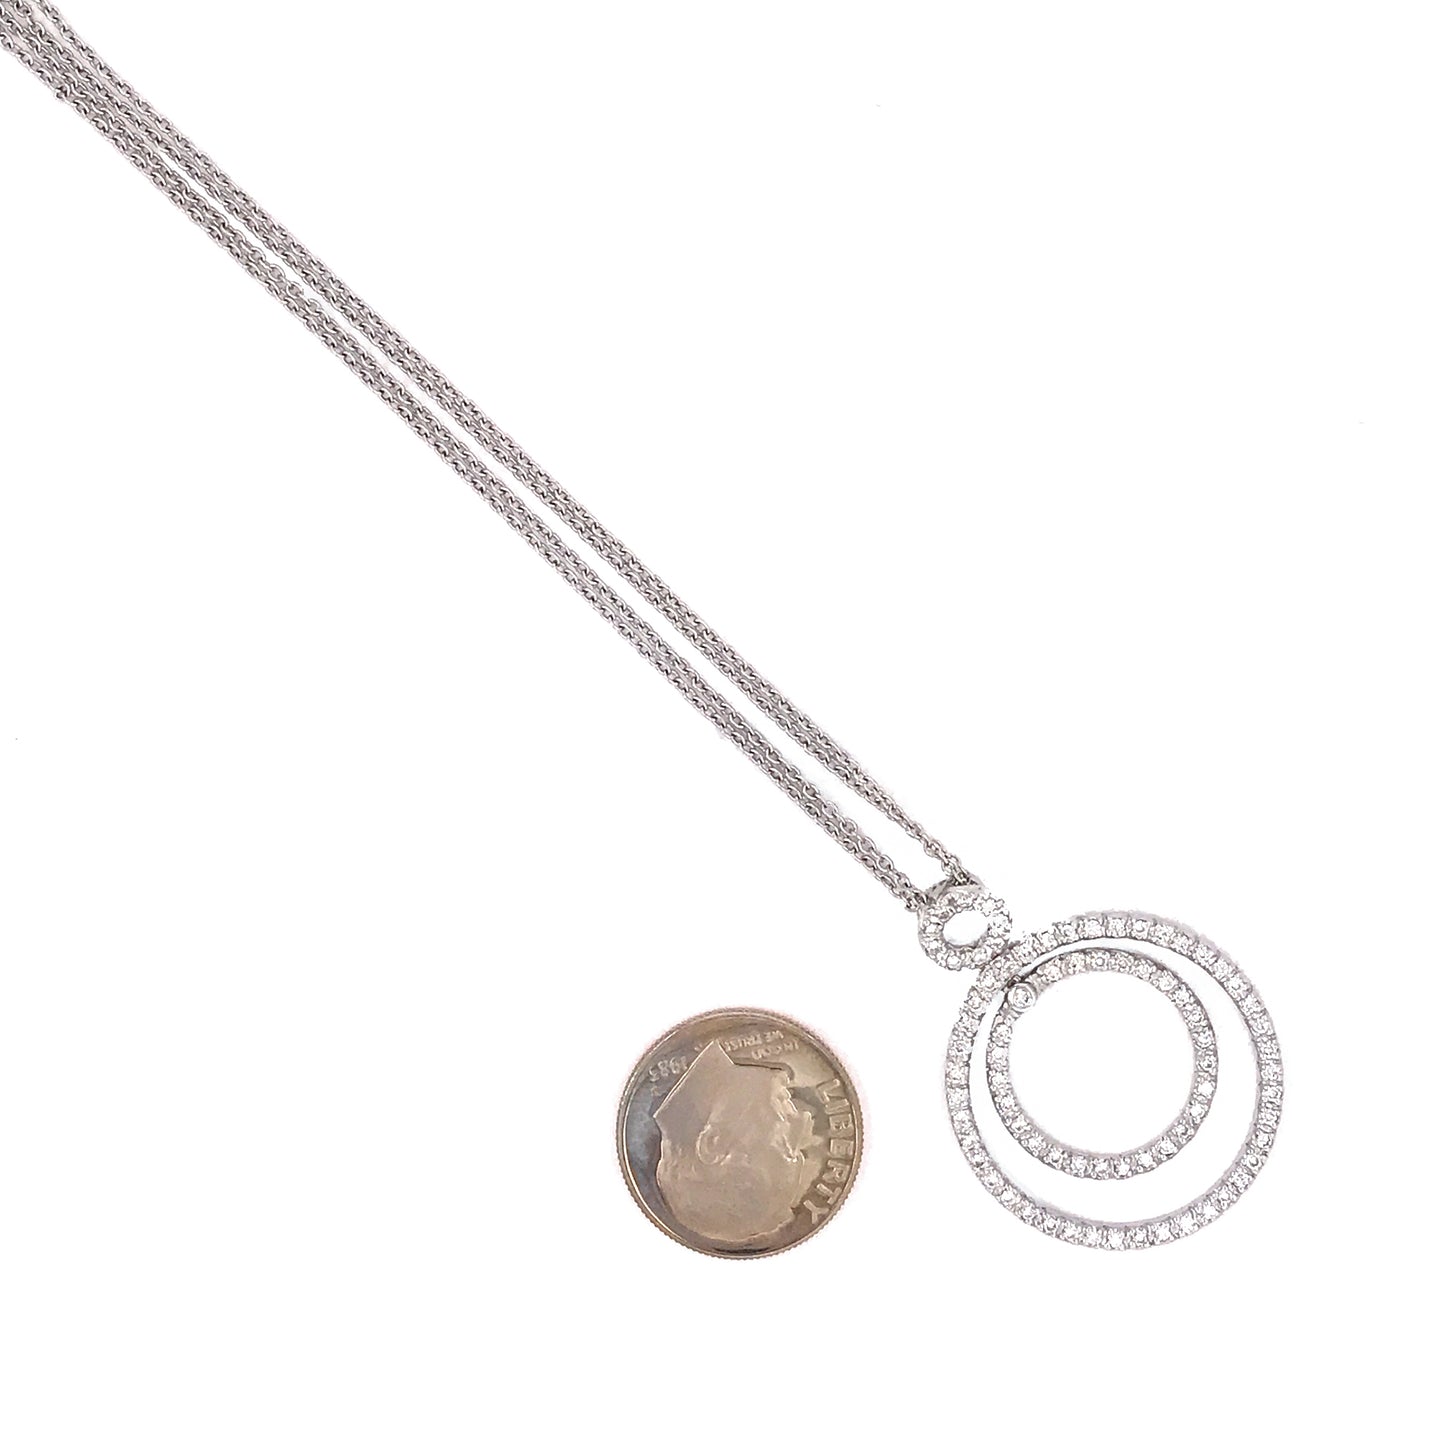 Load image into Gallery viewer, 18k White Gold  Diamond Circle of Life Double Chain Necklace
